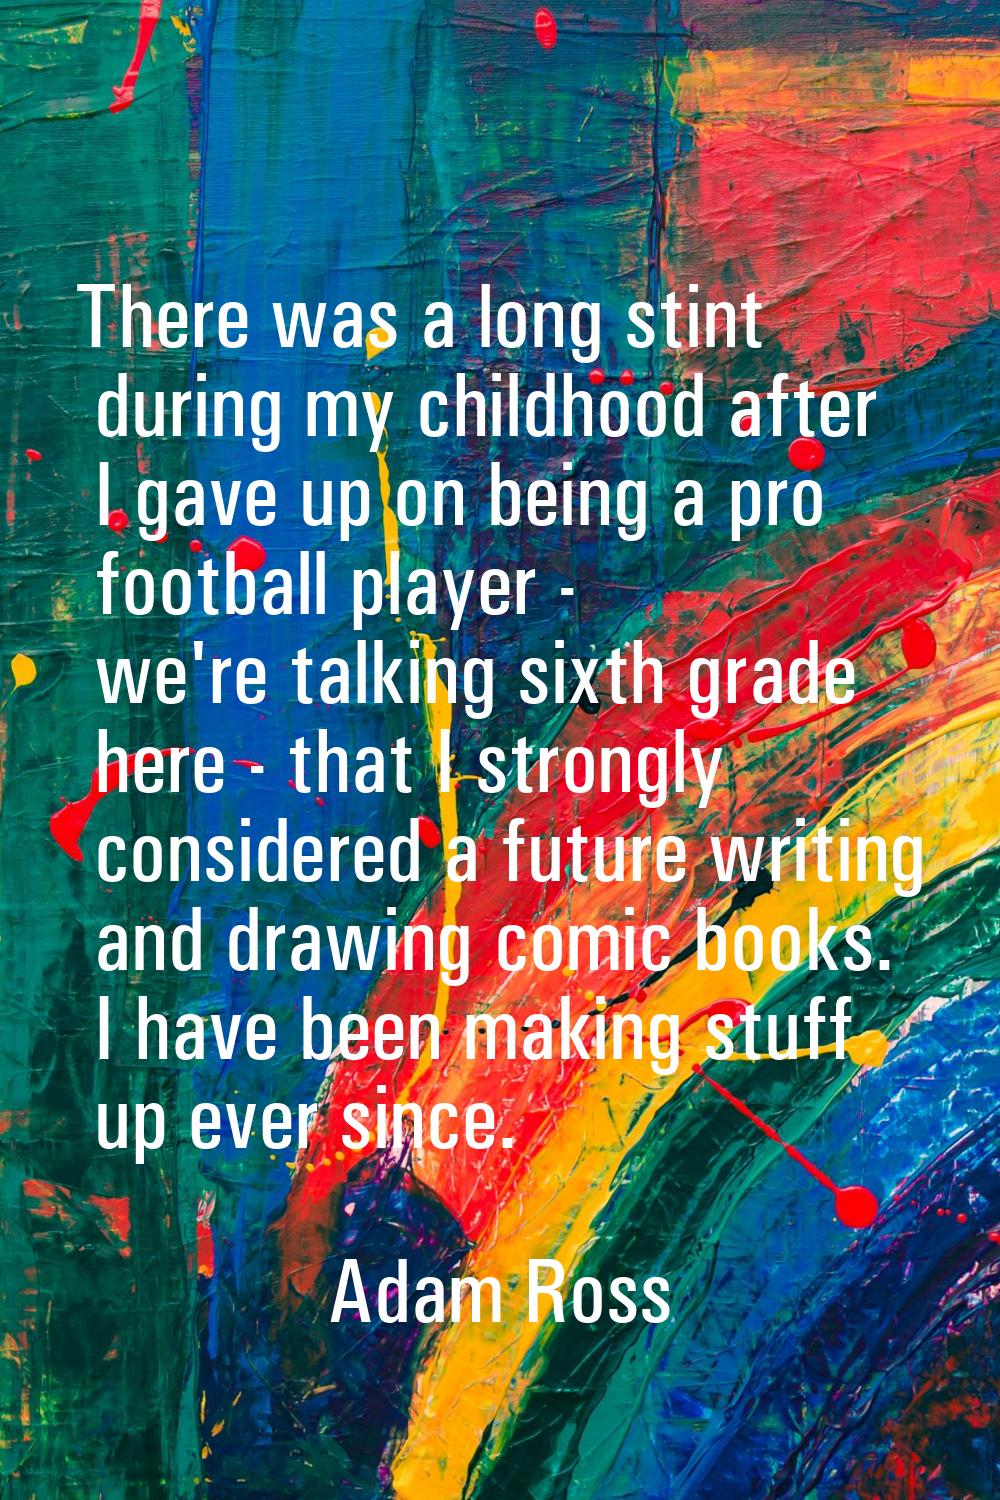 There was a long stint during my childhood after I gave up on being a pro football player - we're t